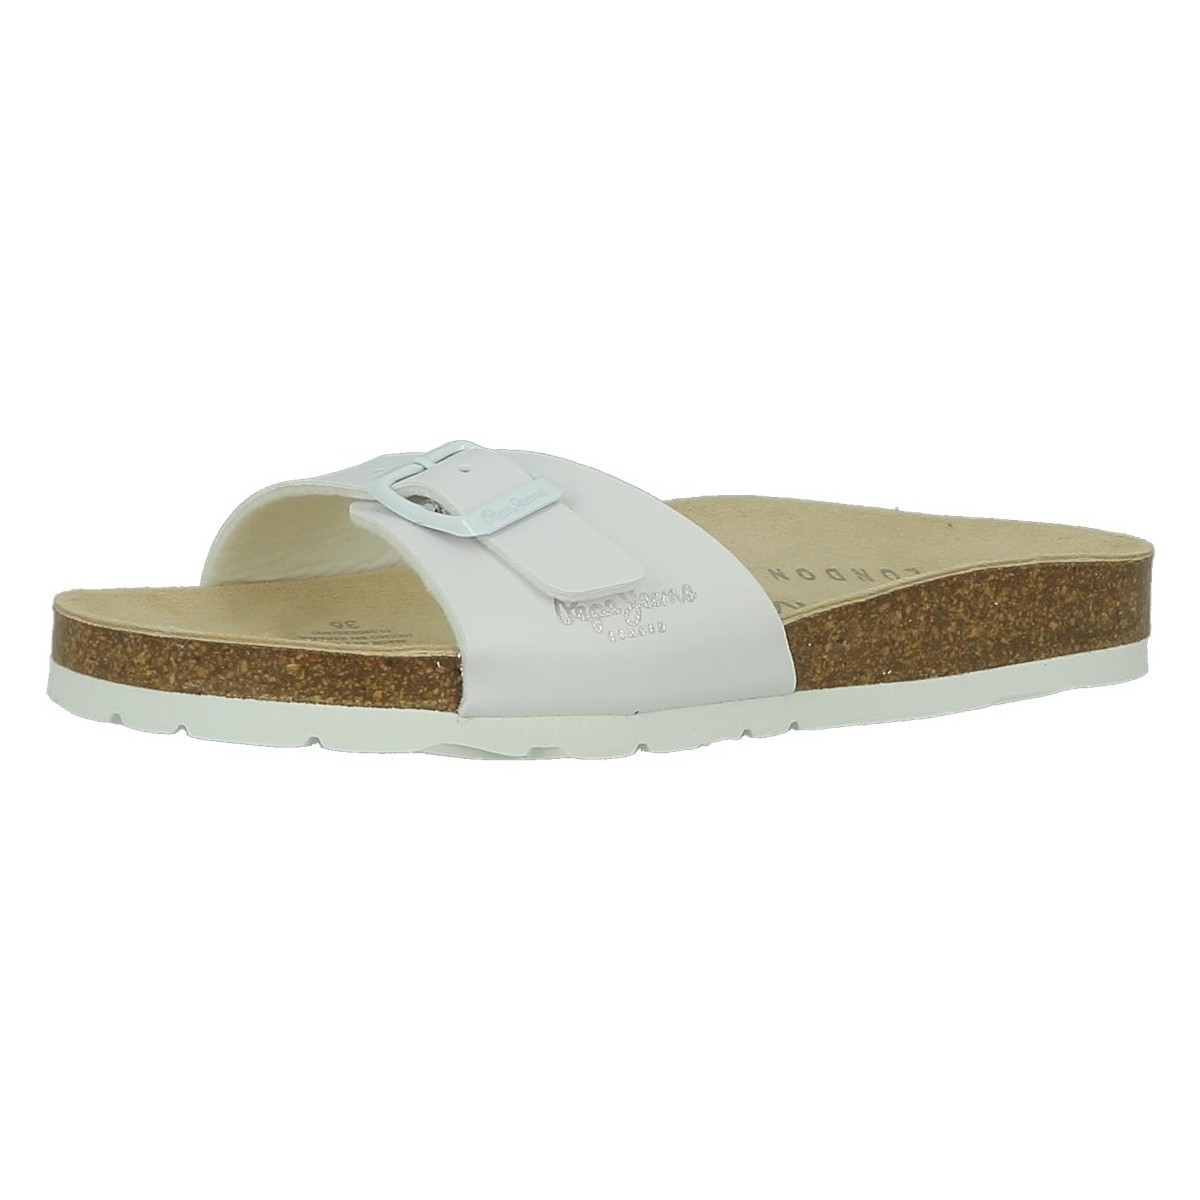 Chaussures Femme Mules Pepe jeans OBAN BASIC LFR Blanc